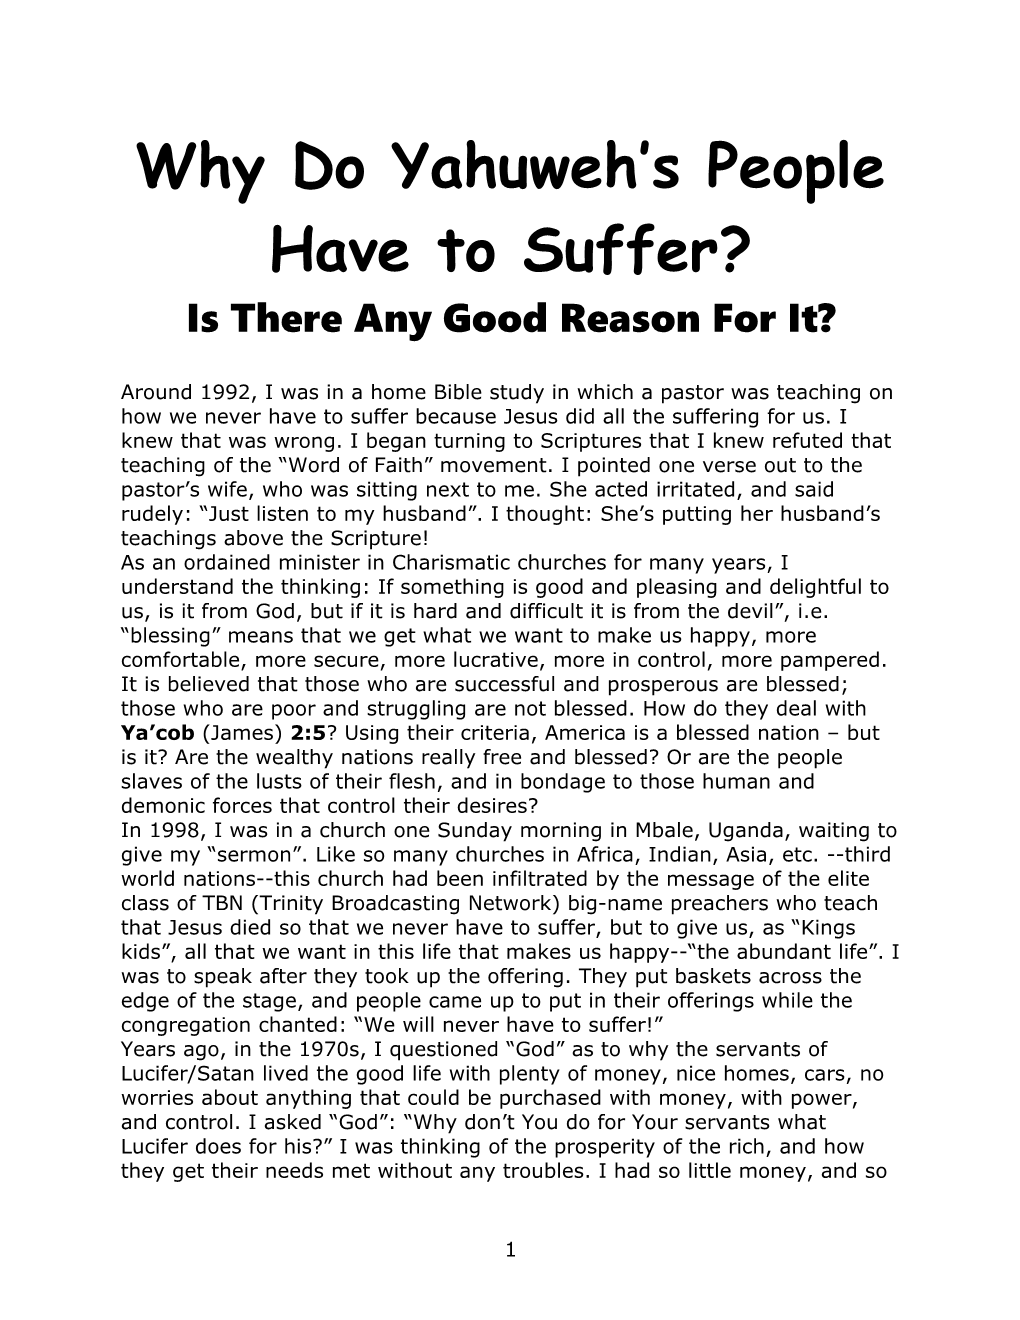 Why Do Yahuweh S People Have to Suffer?